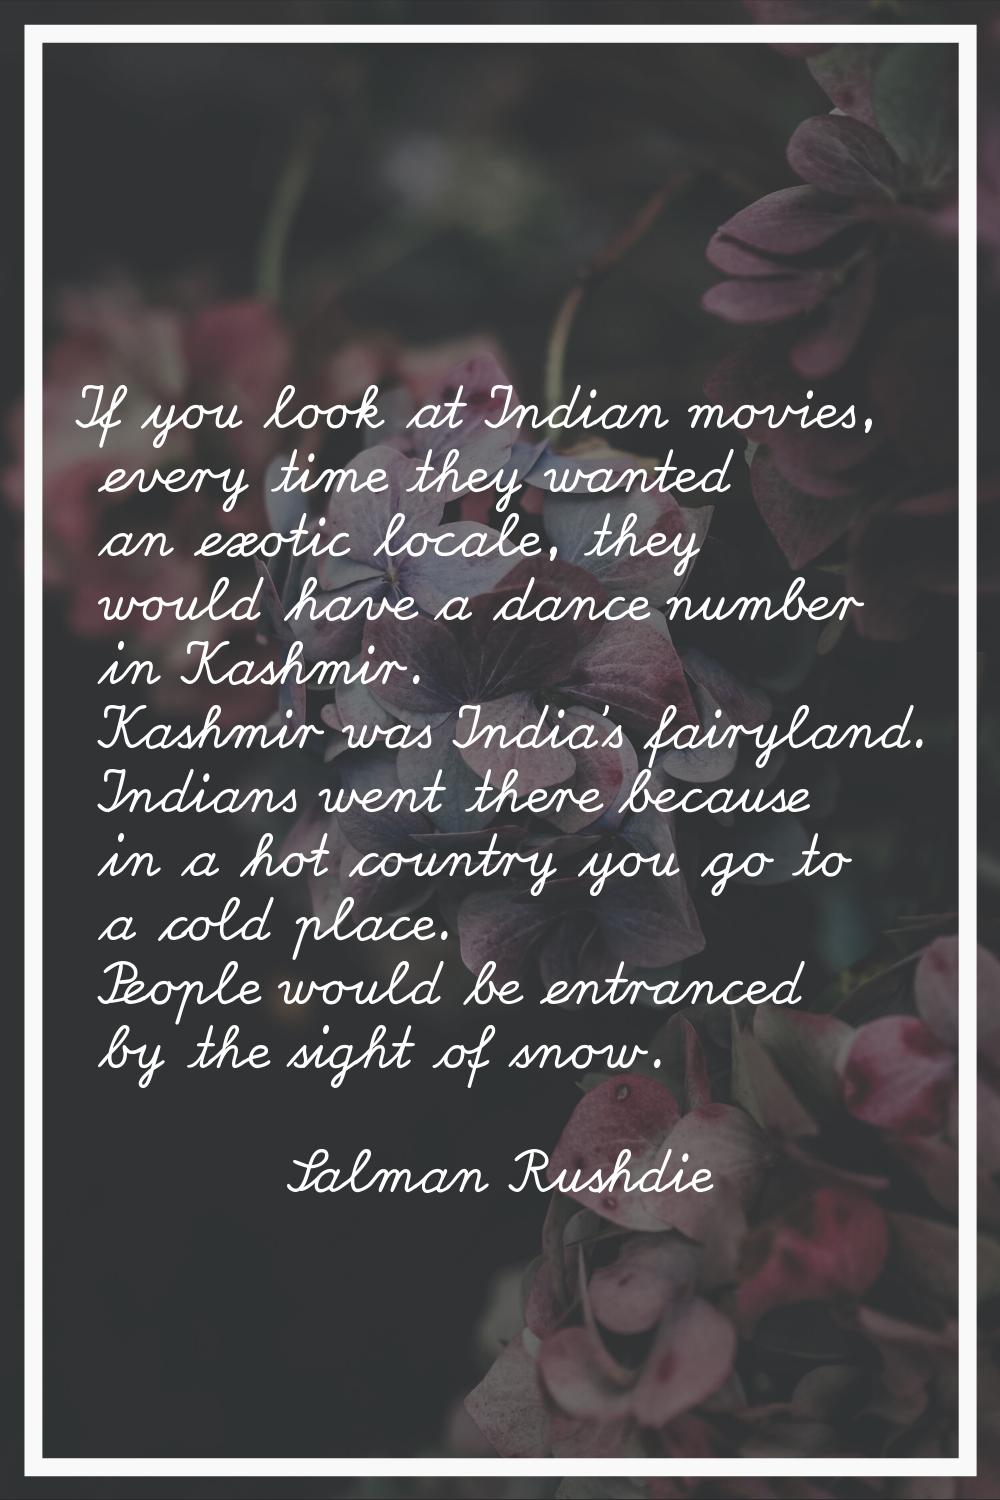 If you look at Indian movies, every time they wanted an exotic locale, they would have a dance numb